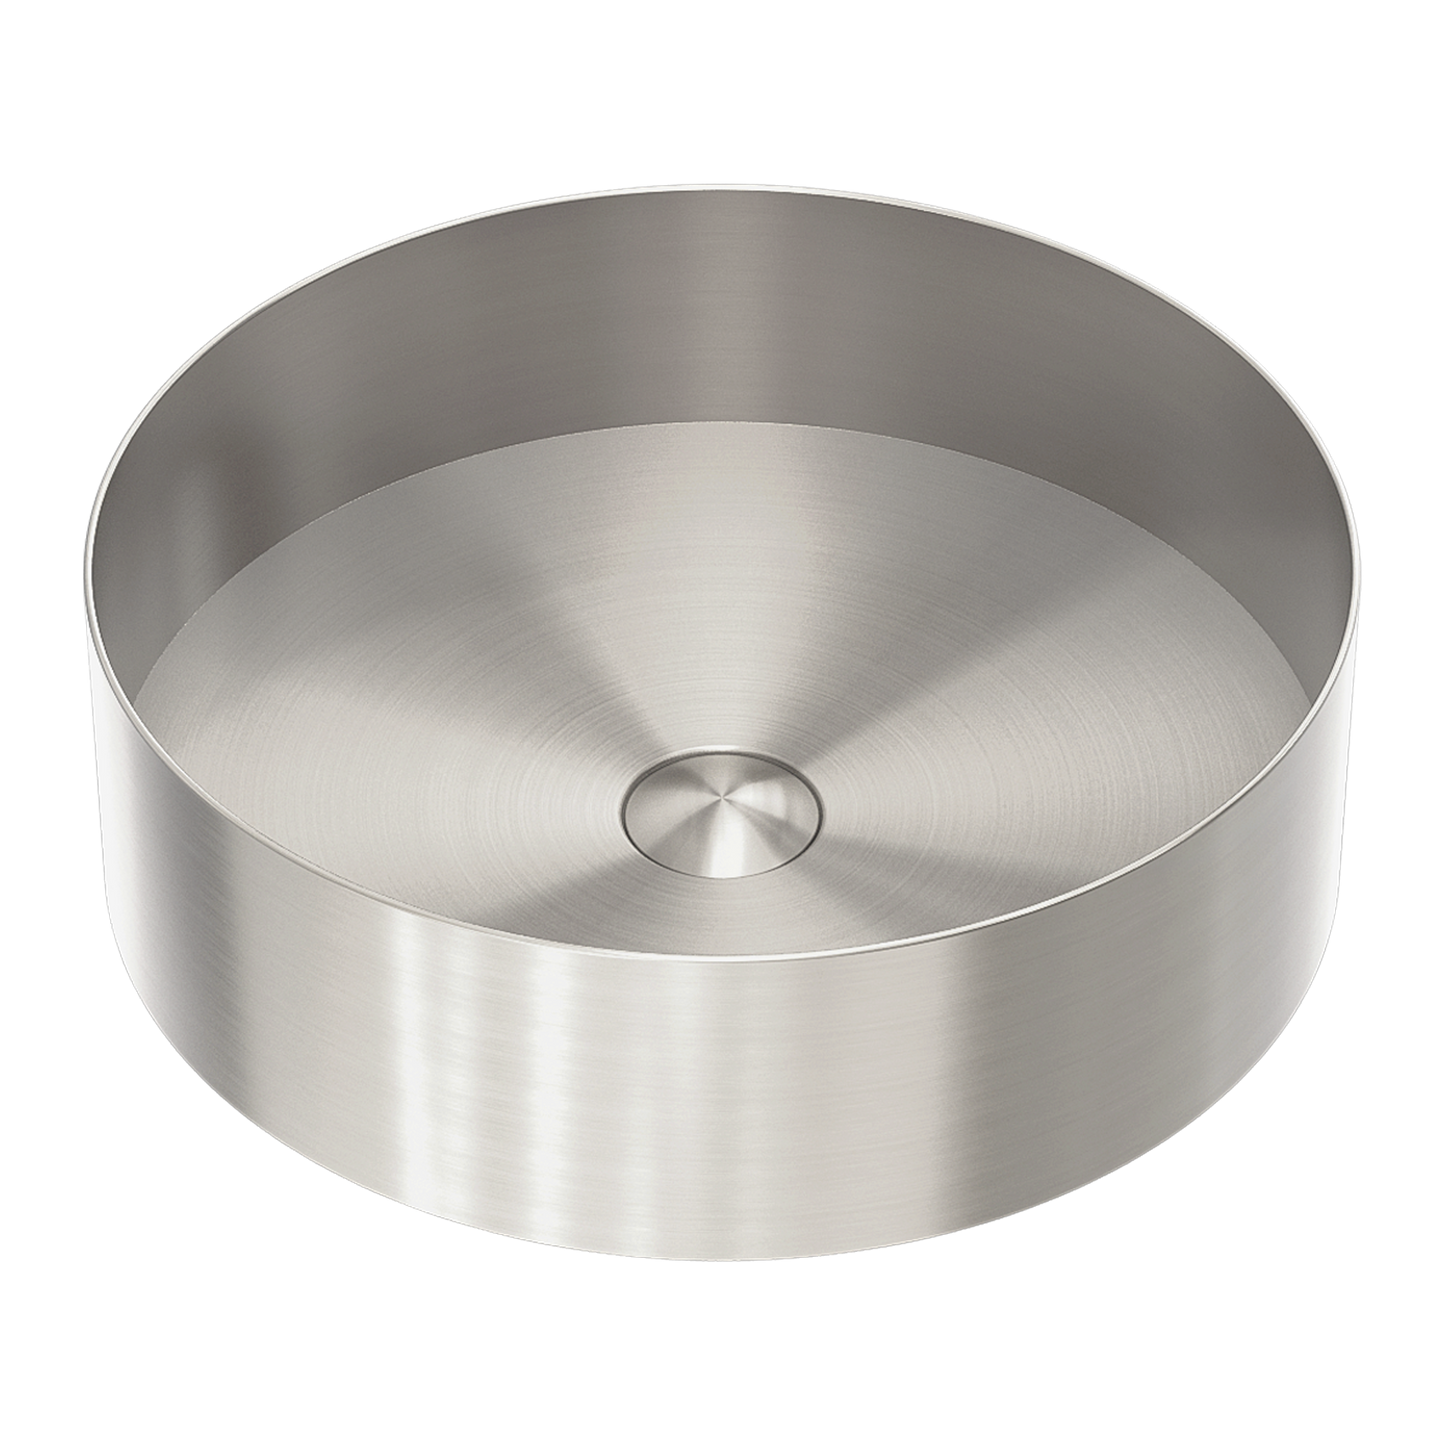 Opal Stainless Steel Round Counter Top Basin - Brushed Nickel with PVD Coating